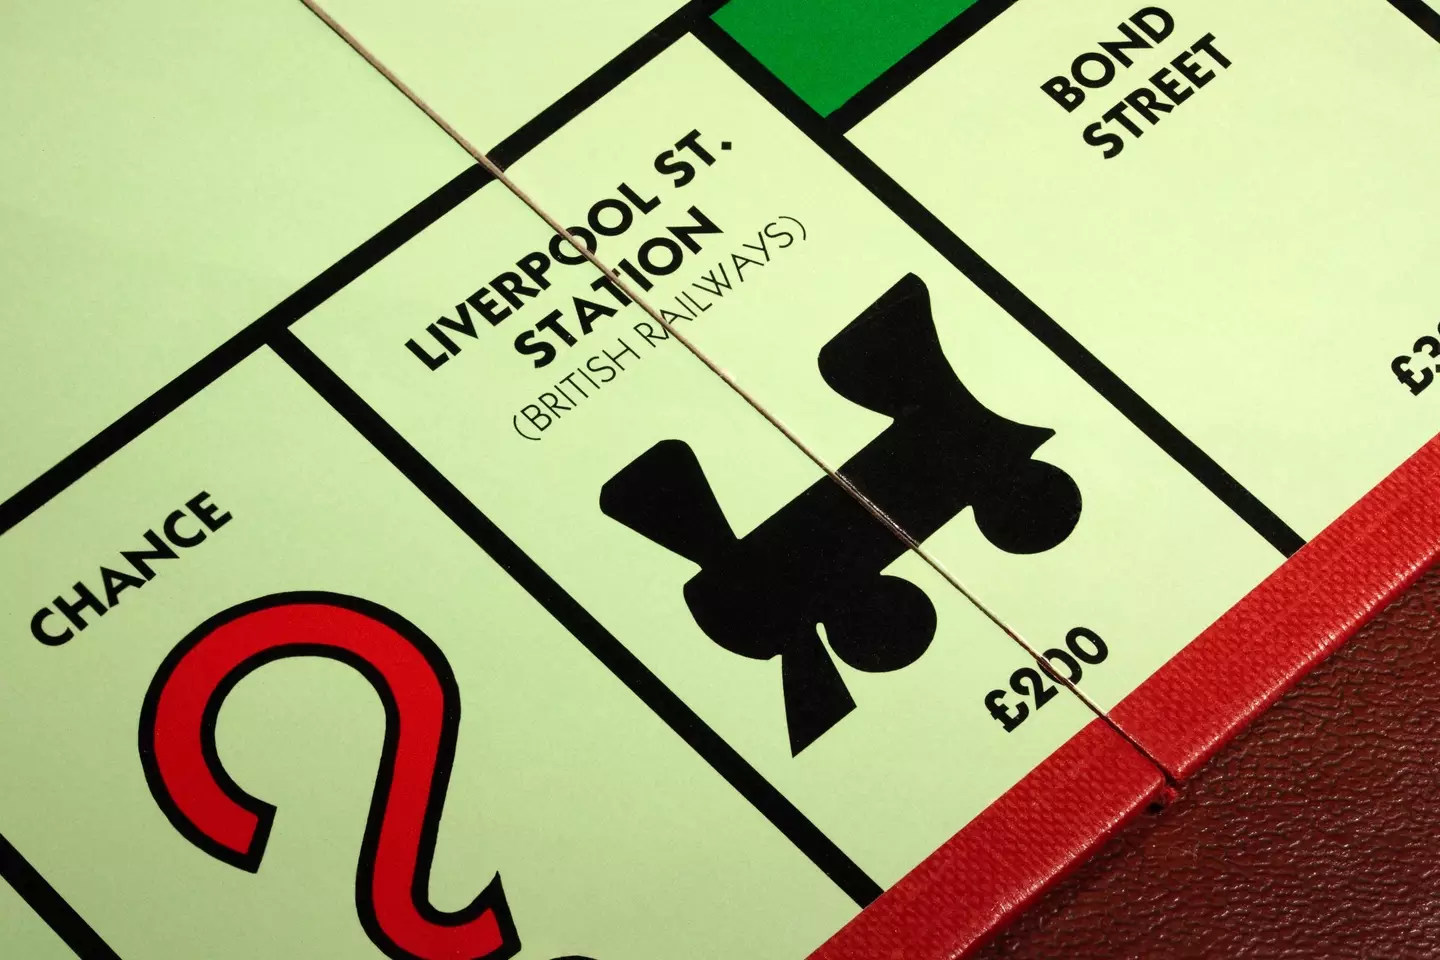 Monopoly is a classic Christmas pursuit, but it can get heated.